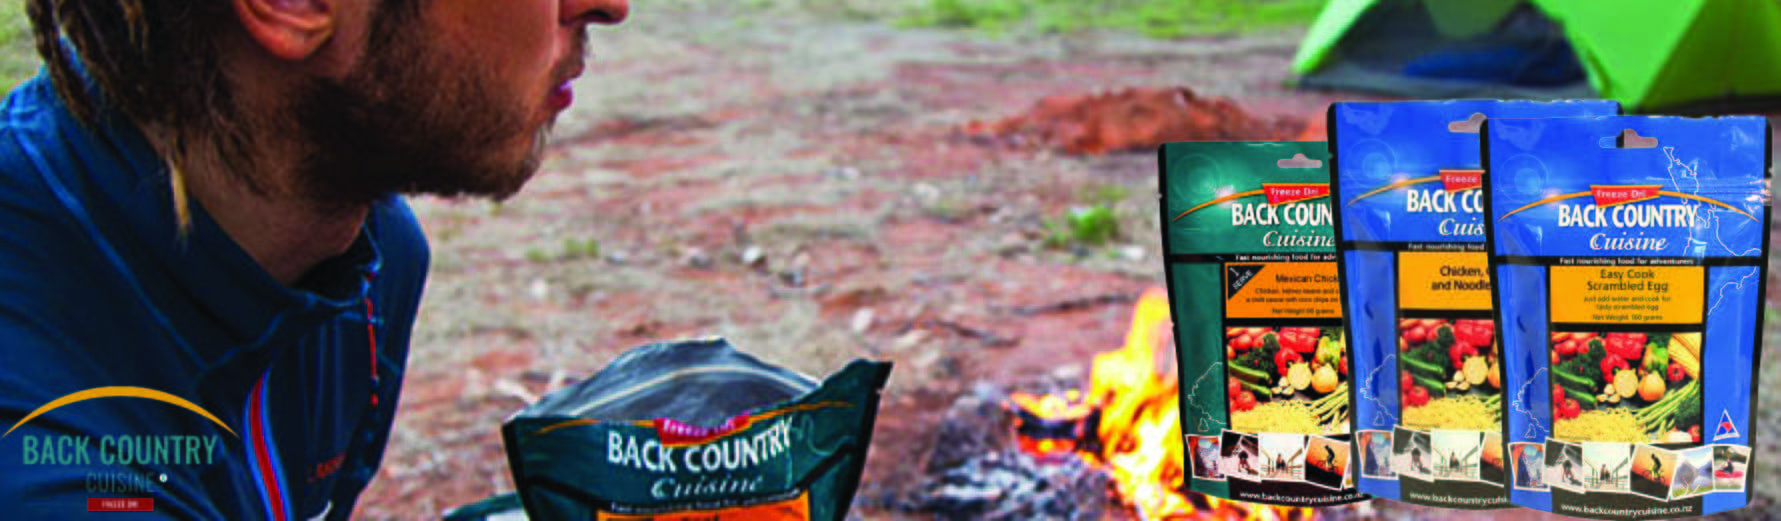 Back Country Cuisine: Nourishing Meals & Food